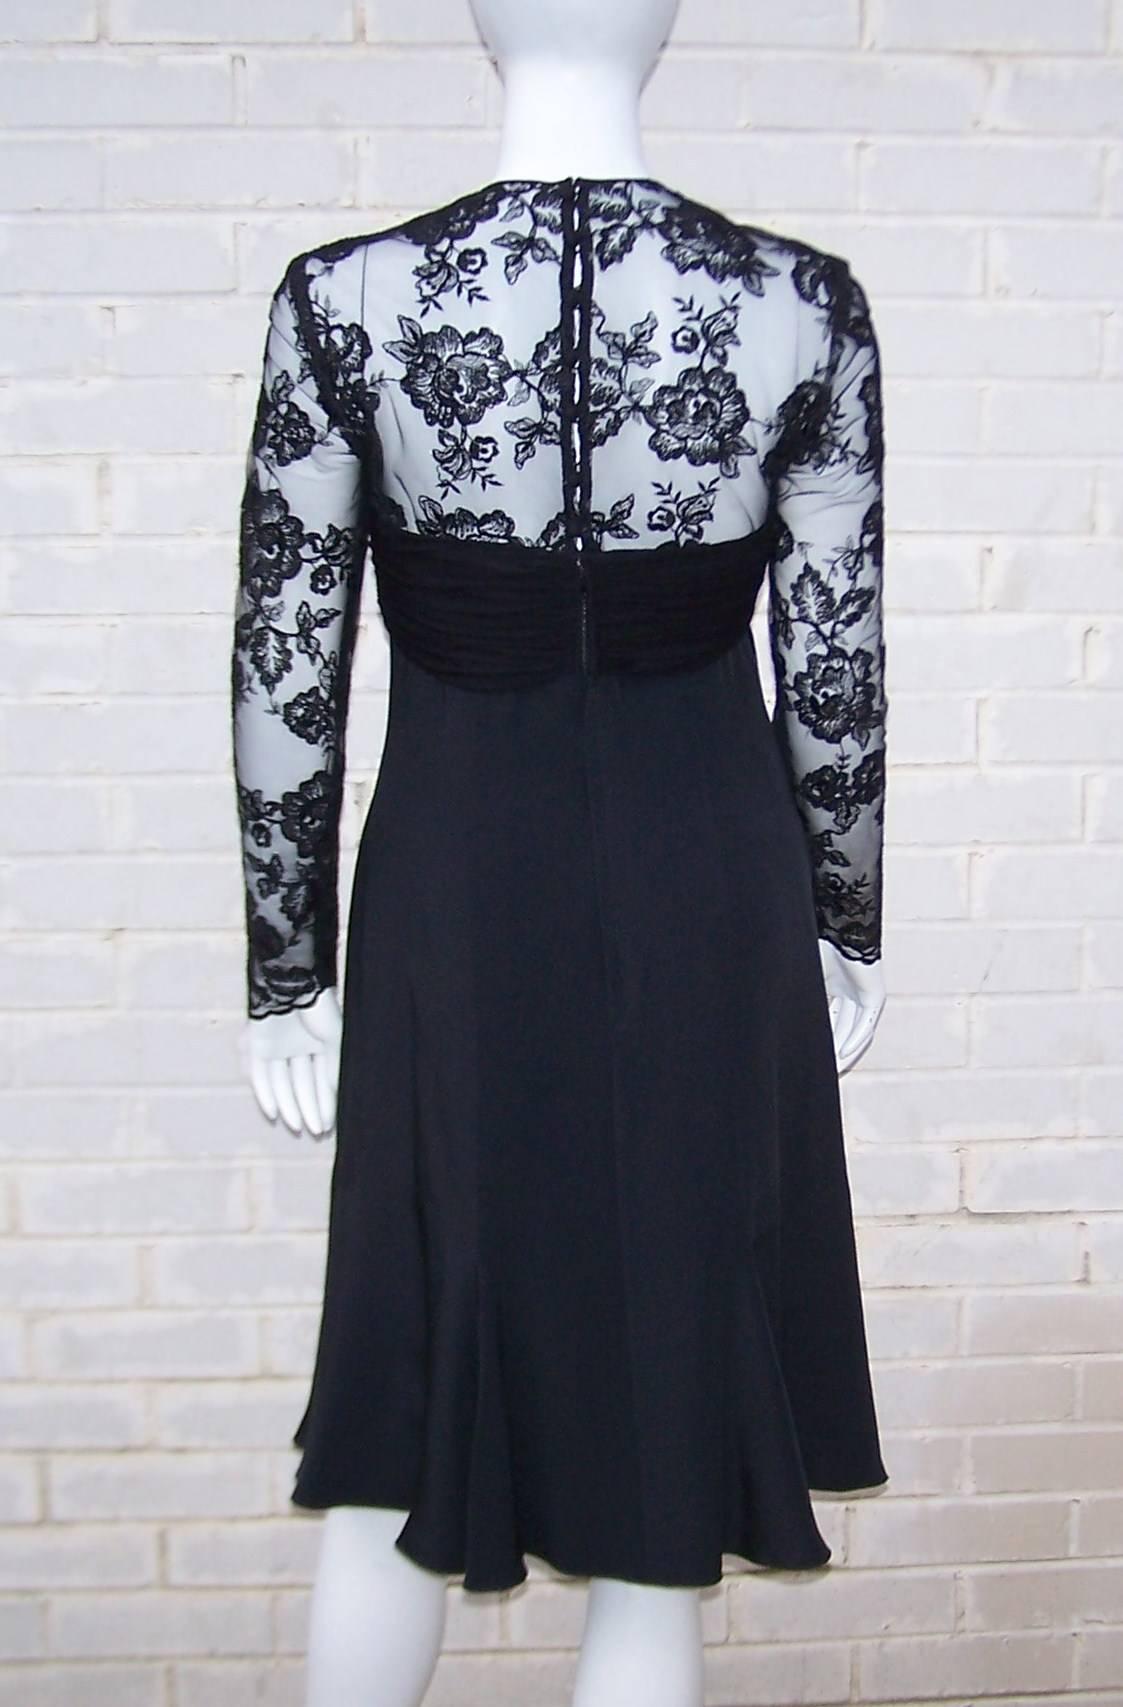 Adele Simpson Black Silk Cocktail Dress With Lace Bodice, C.1980 In Good Condition For Sale In Atlanta, GA